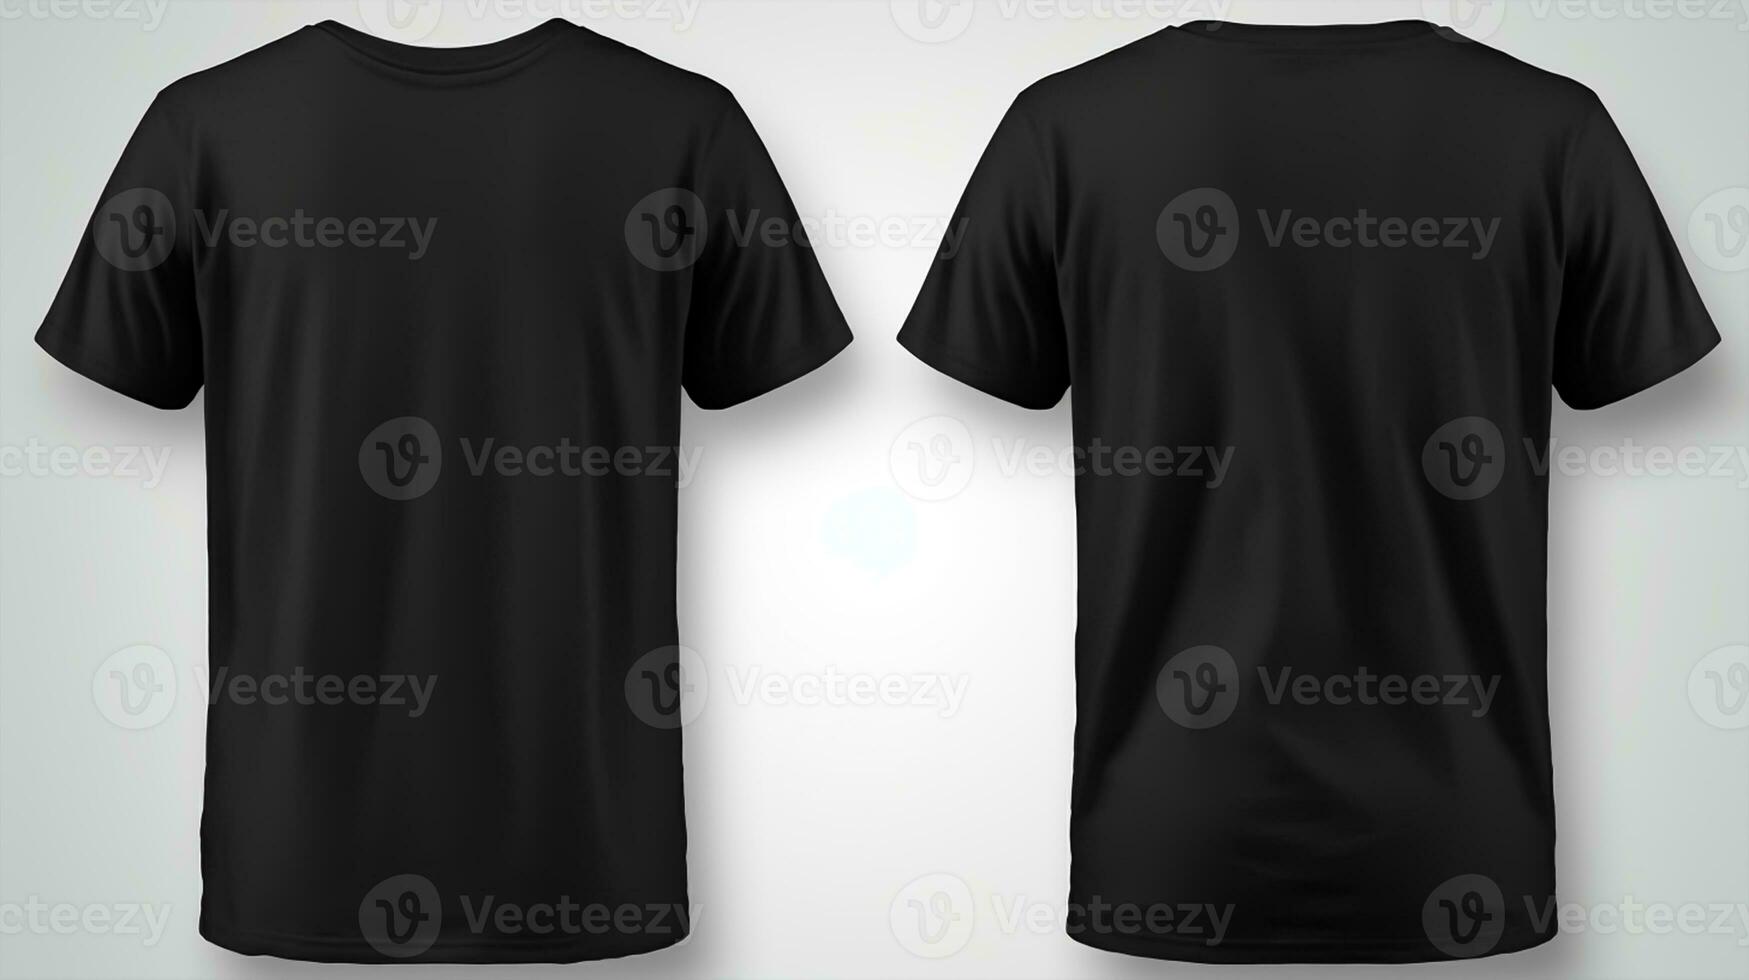 Black T-shirt mockup, front and back view, isolated on black background photo